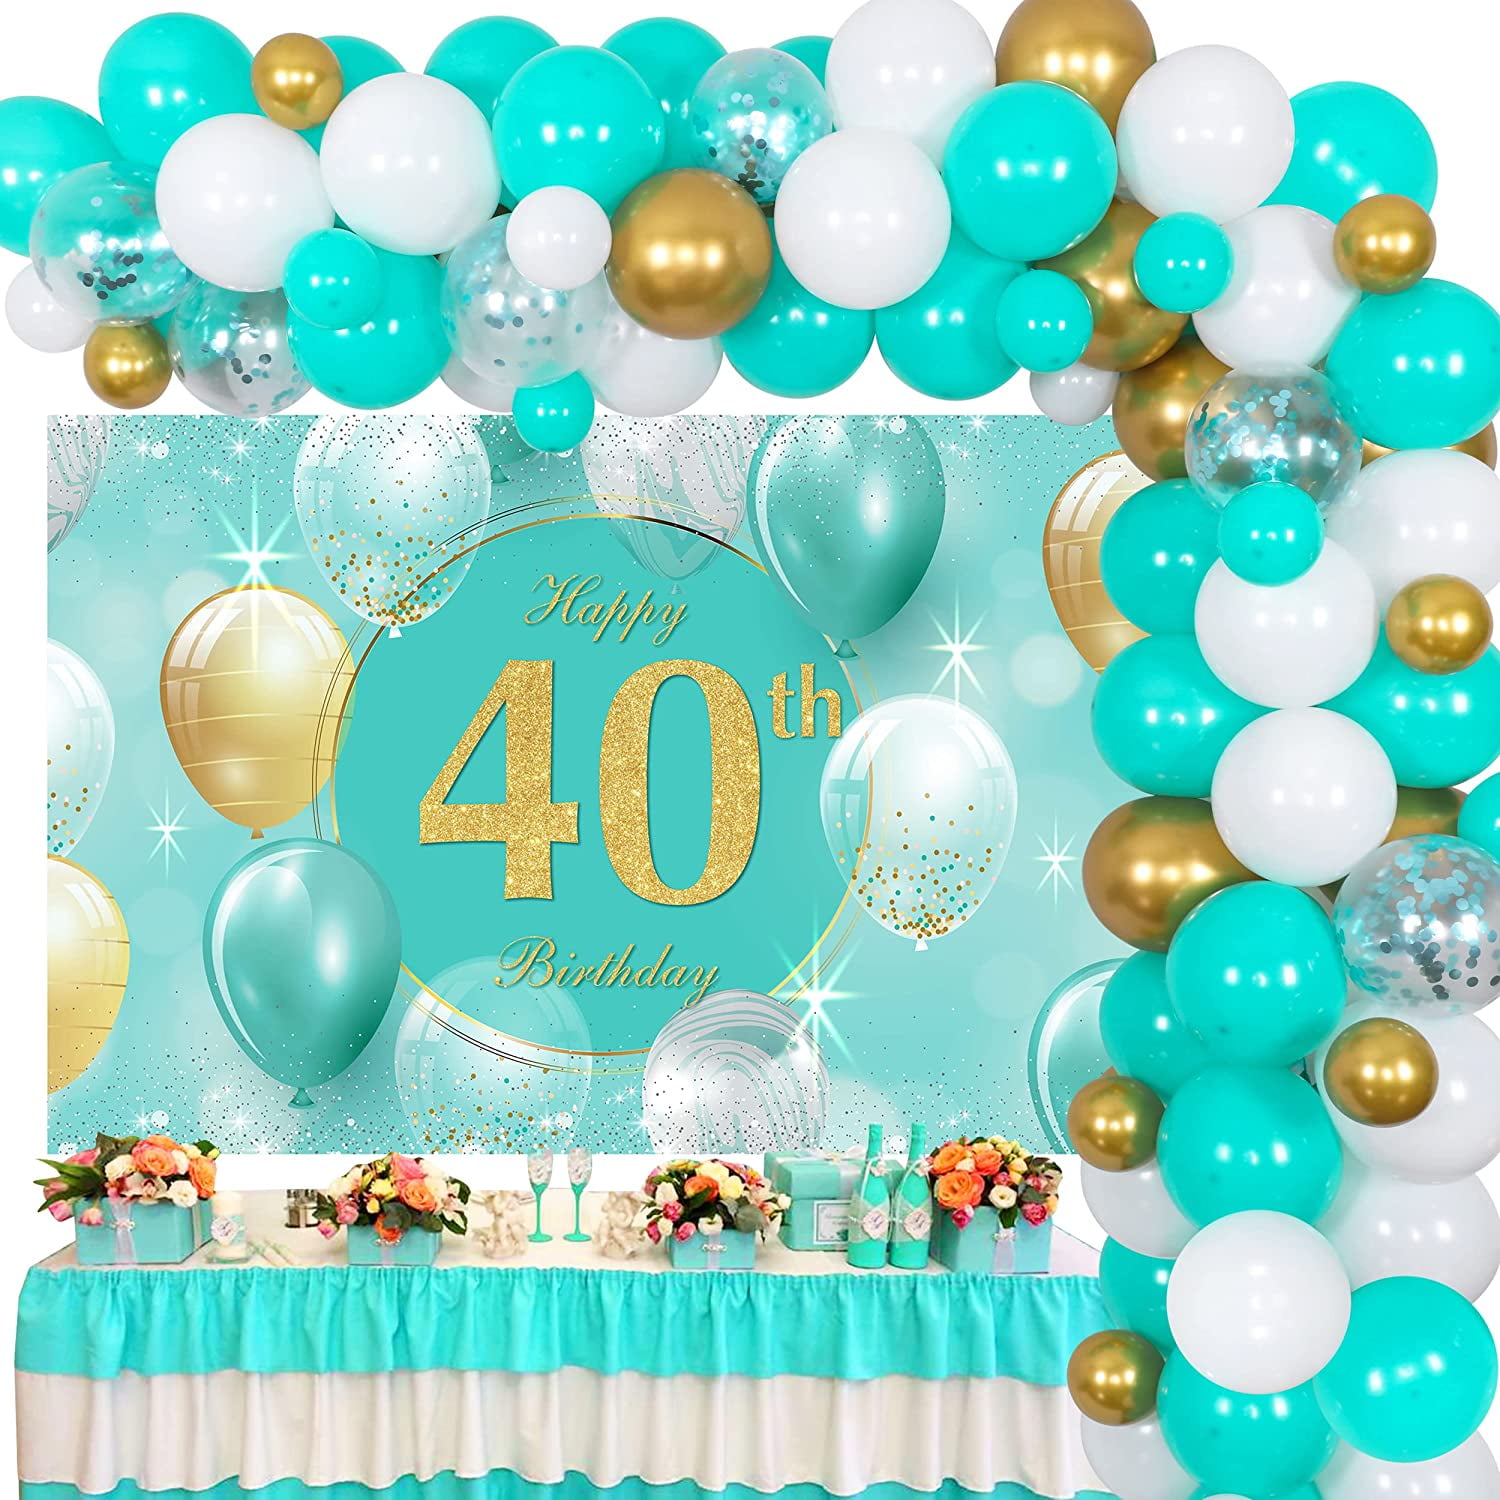 Turquoise 40th Birthday Decorations for Women, Teal Blue 40th Birthday Party Supplies - Backdrop & Balloon Garland Kit for Lady 40 Years Old Birthday Party Decorations Supplies - Walmart.com